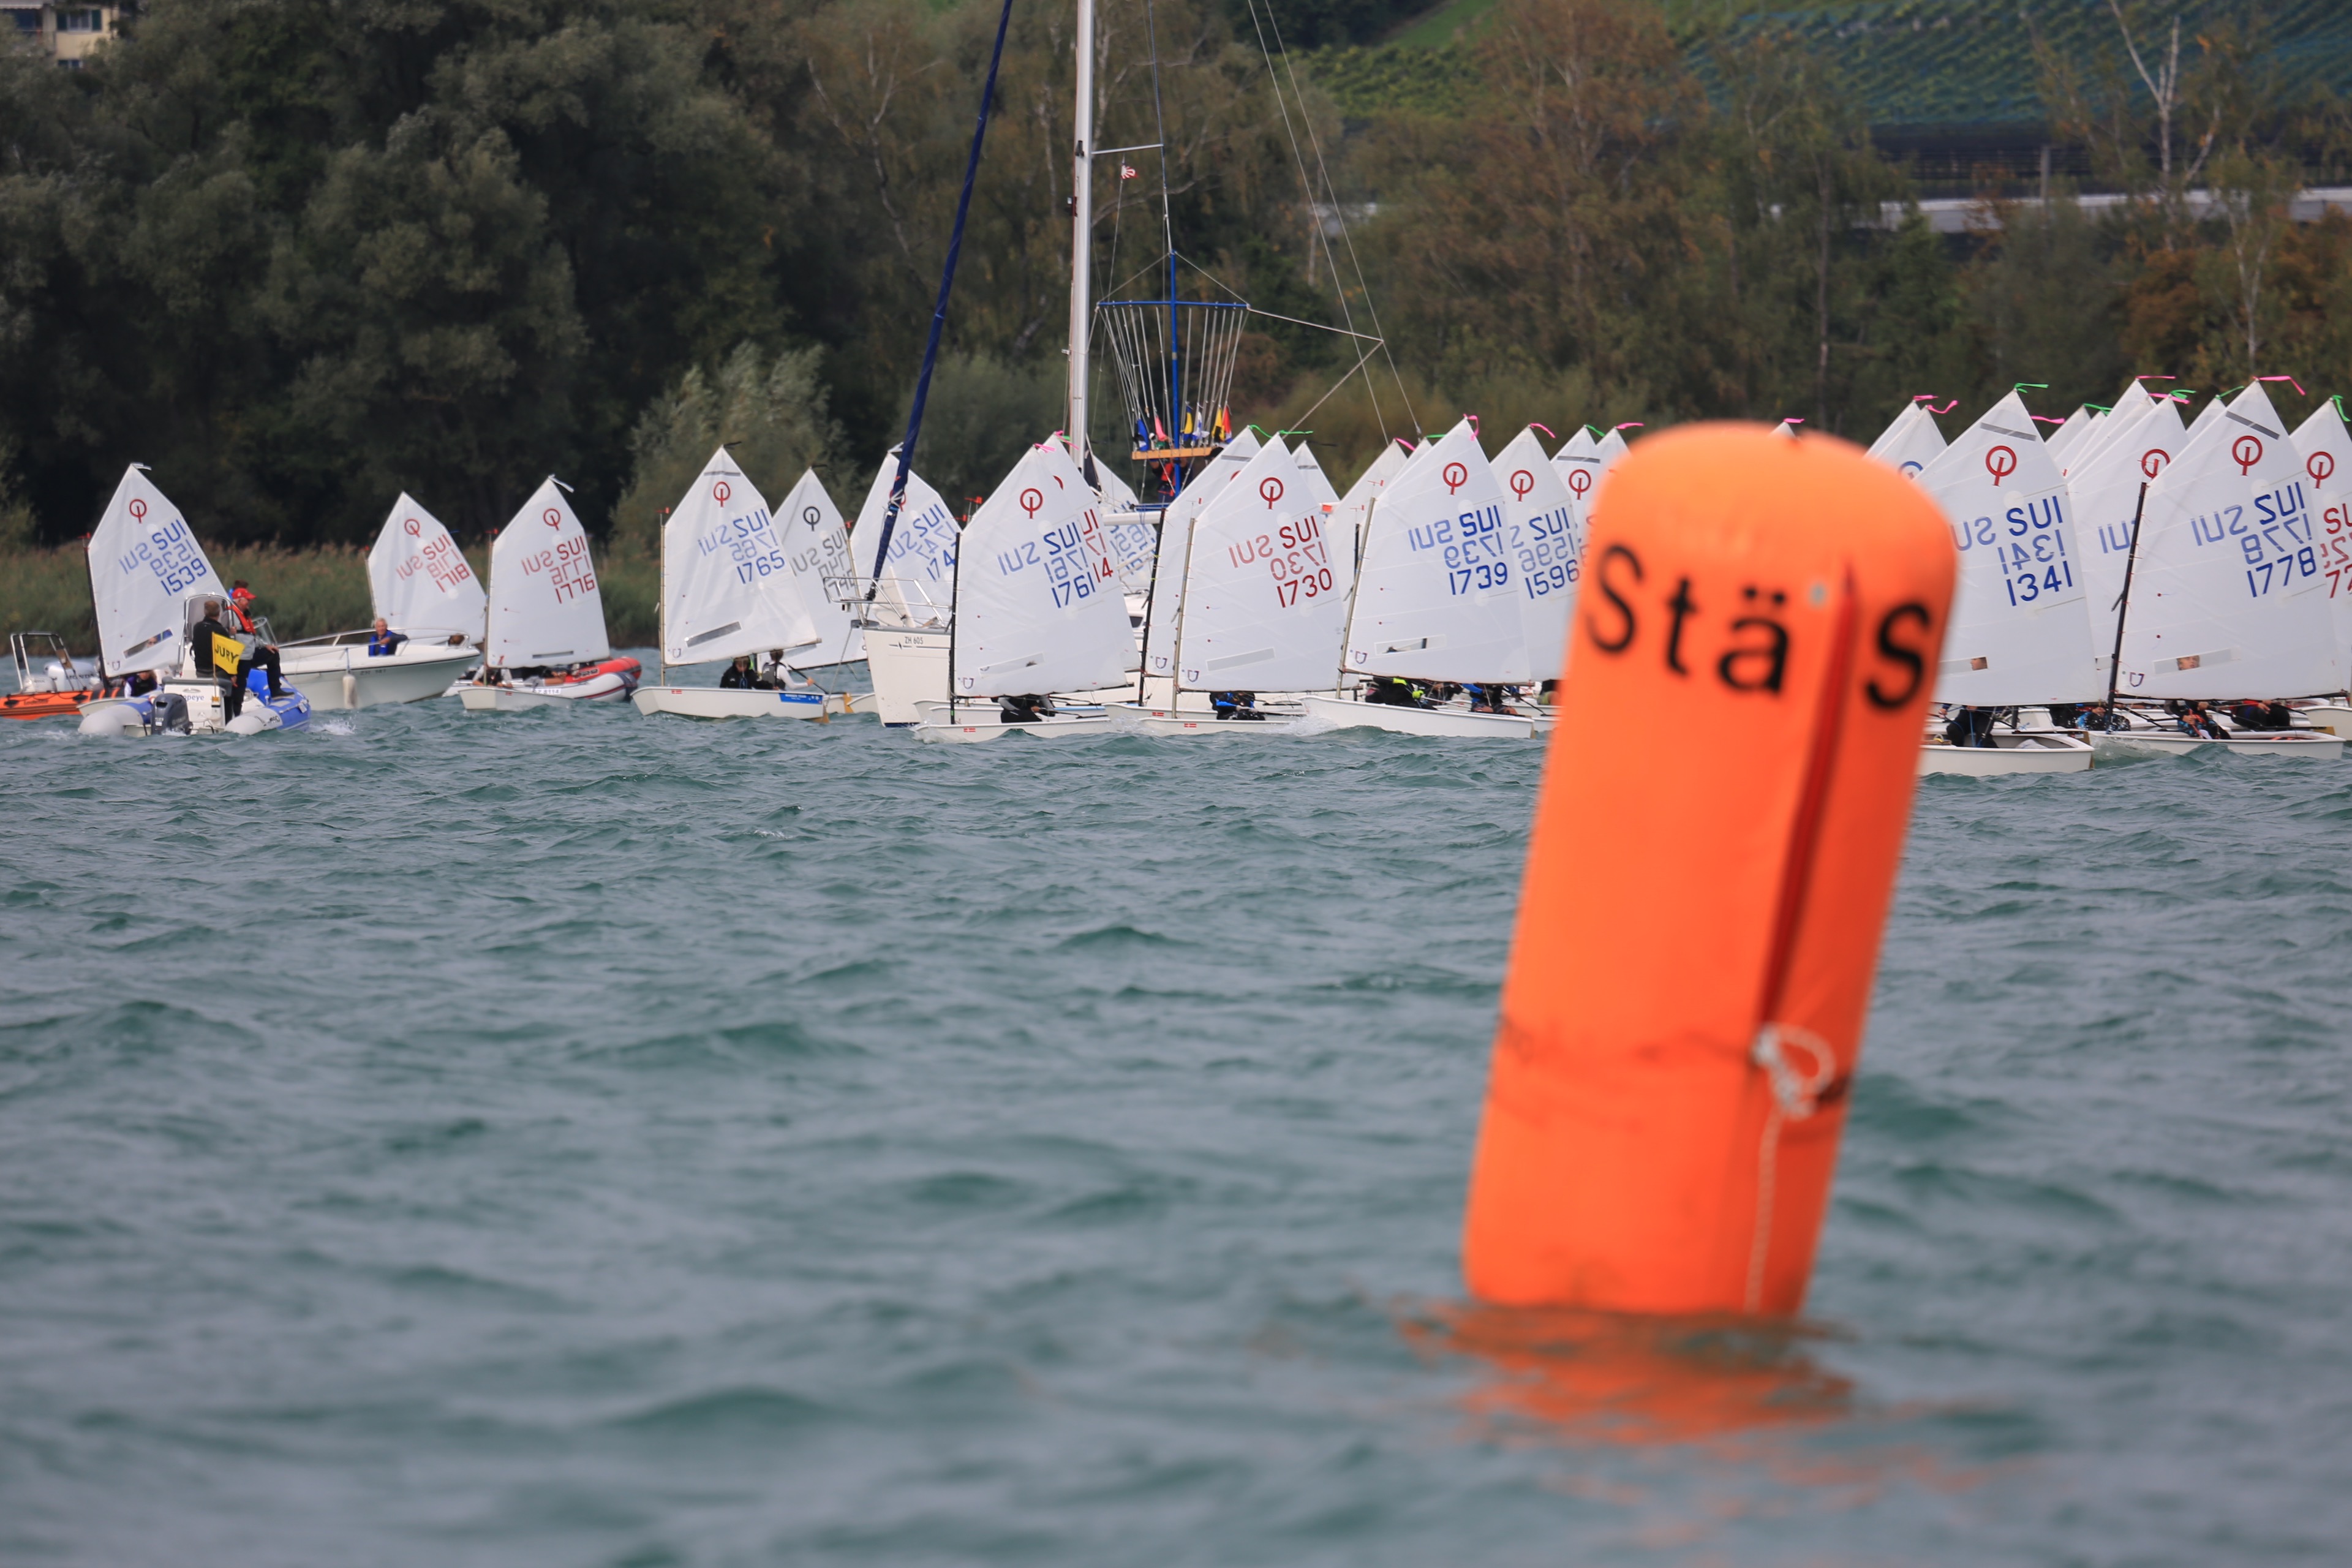  Optimist  Annual Points' Championship 2016  SC Staefa  Final results